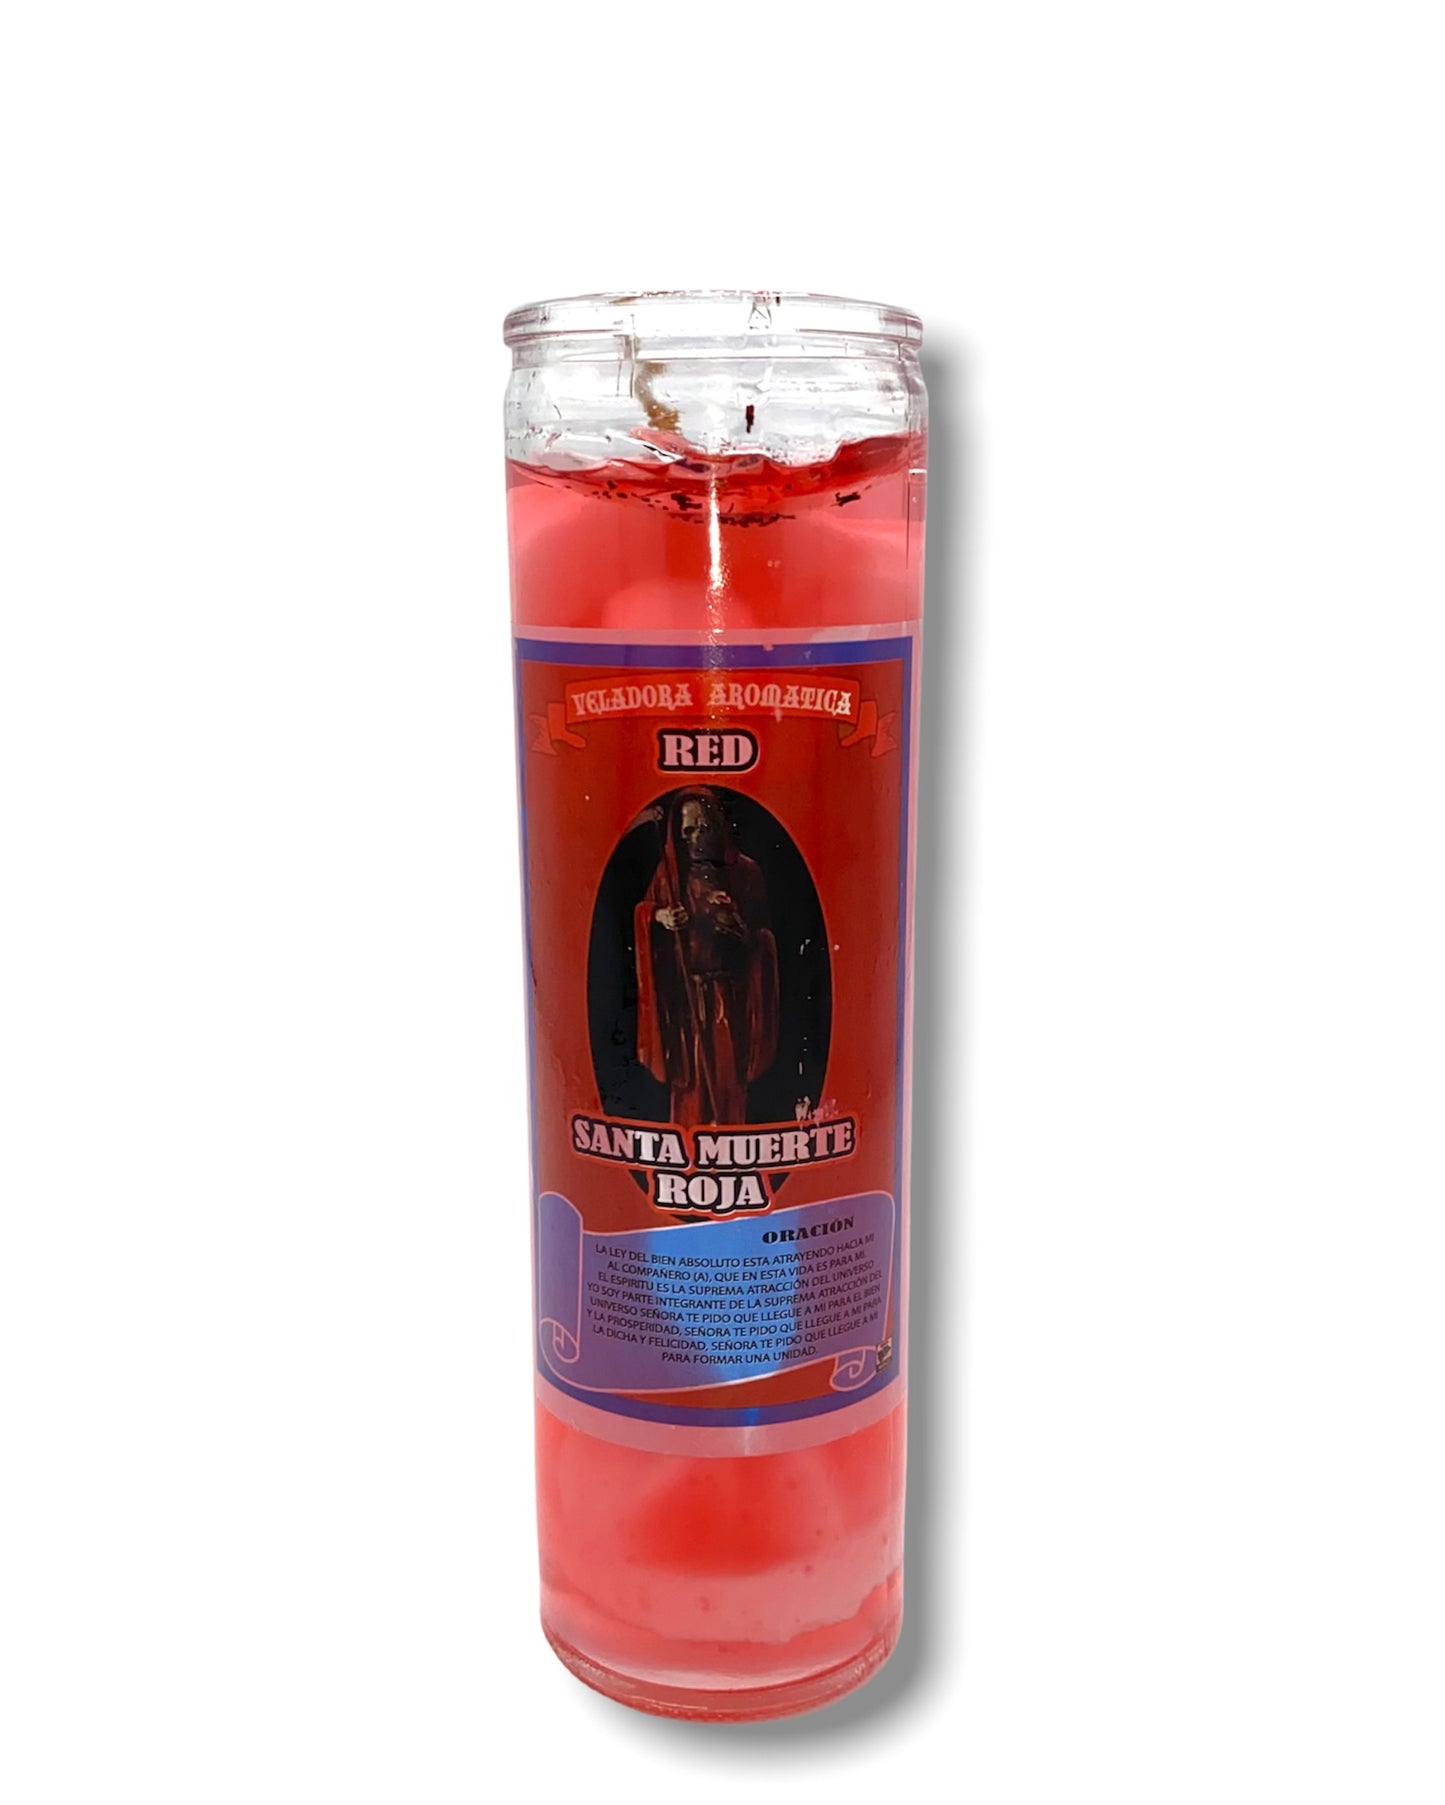 Siete Potencia Seven Powers Candle - Red/Rojo